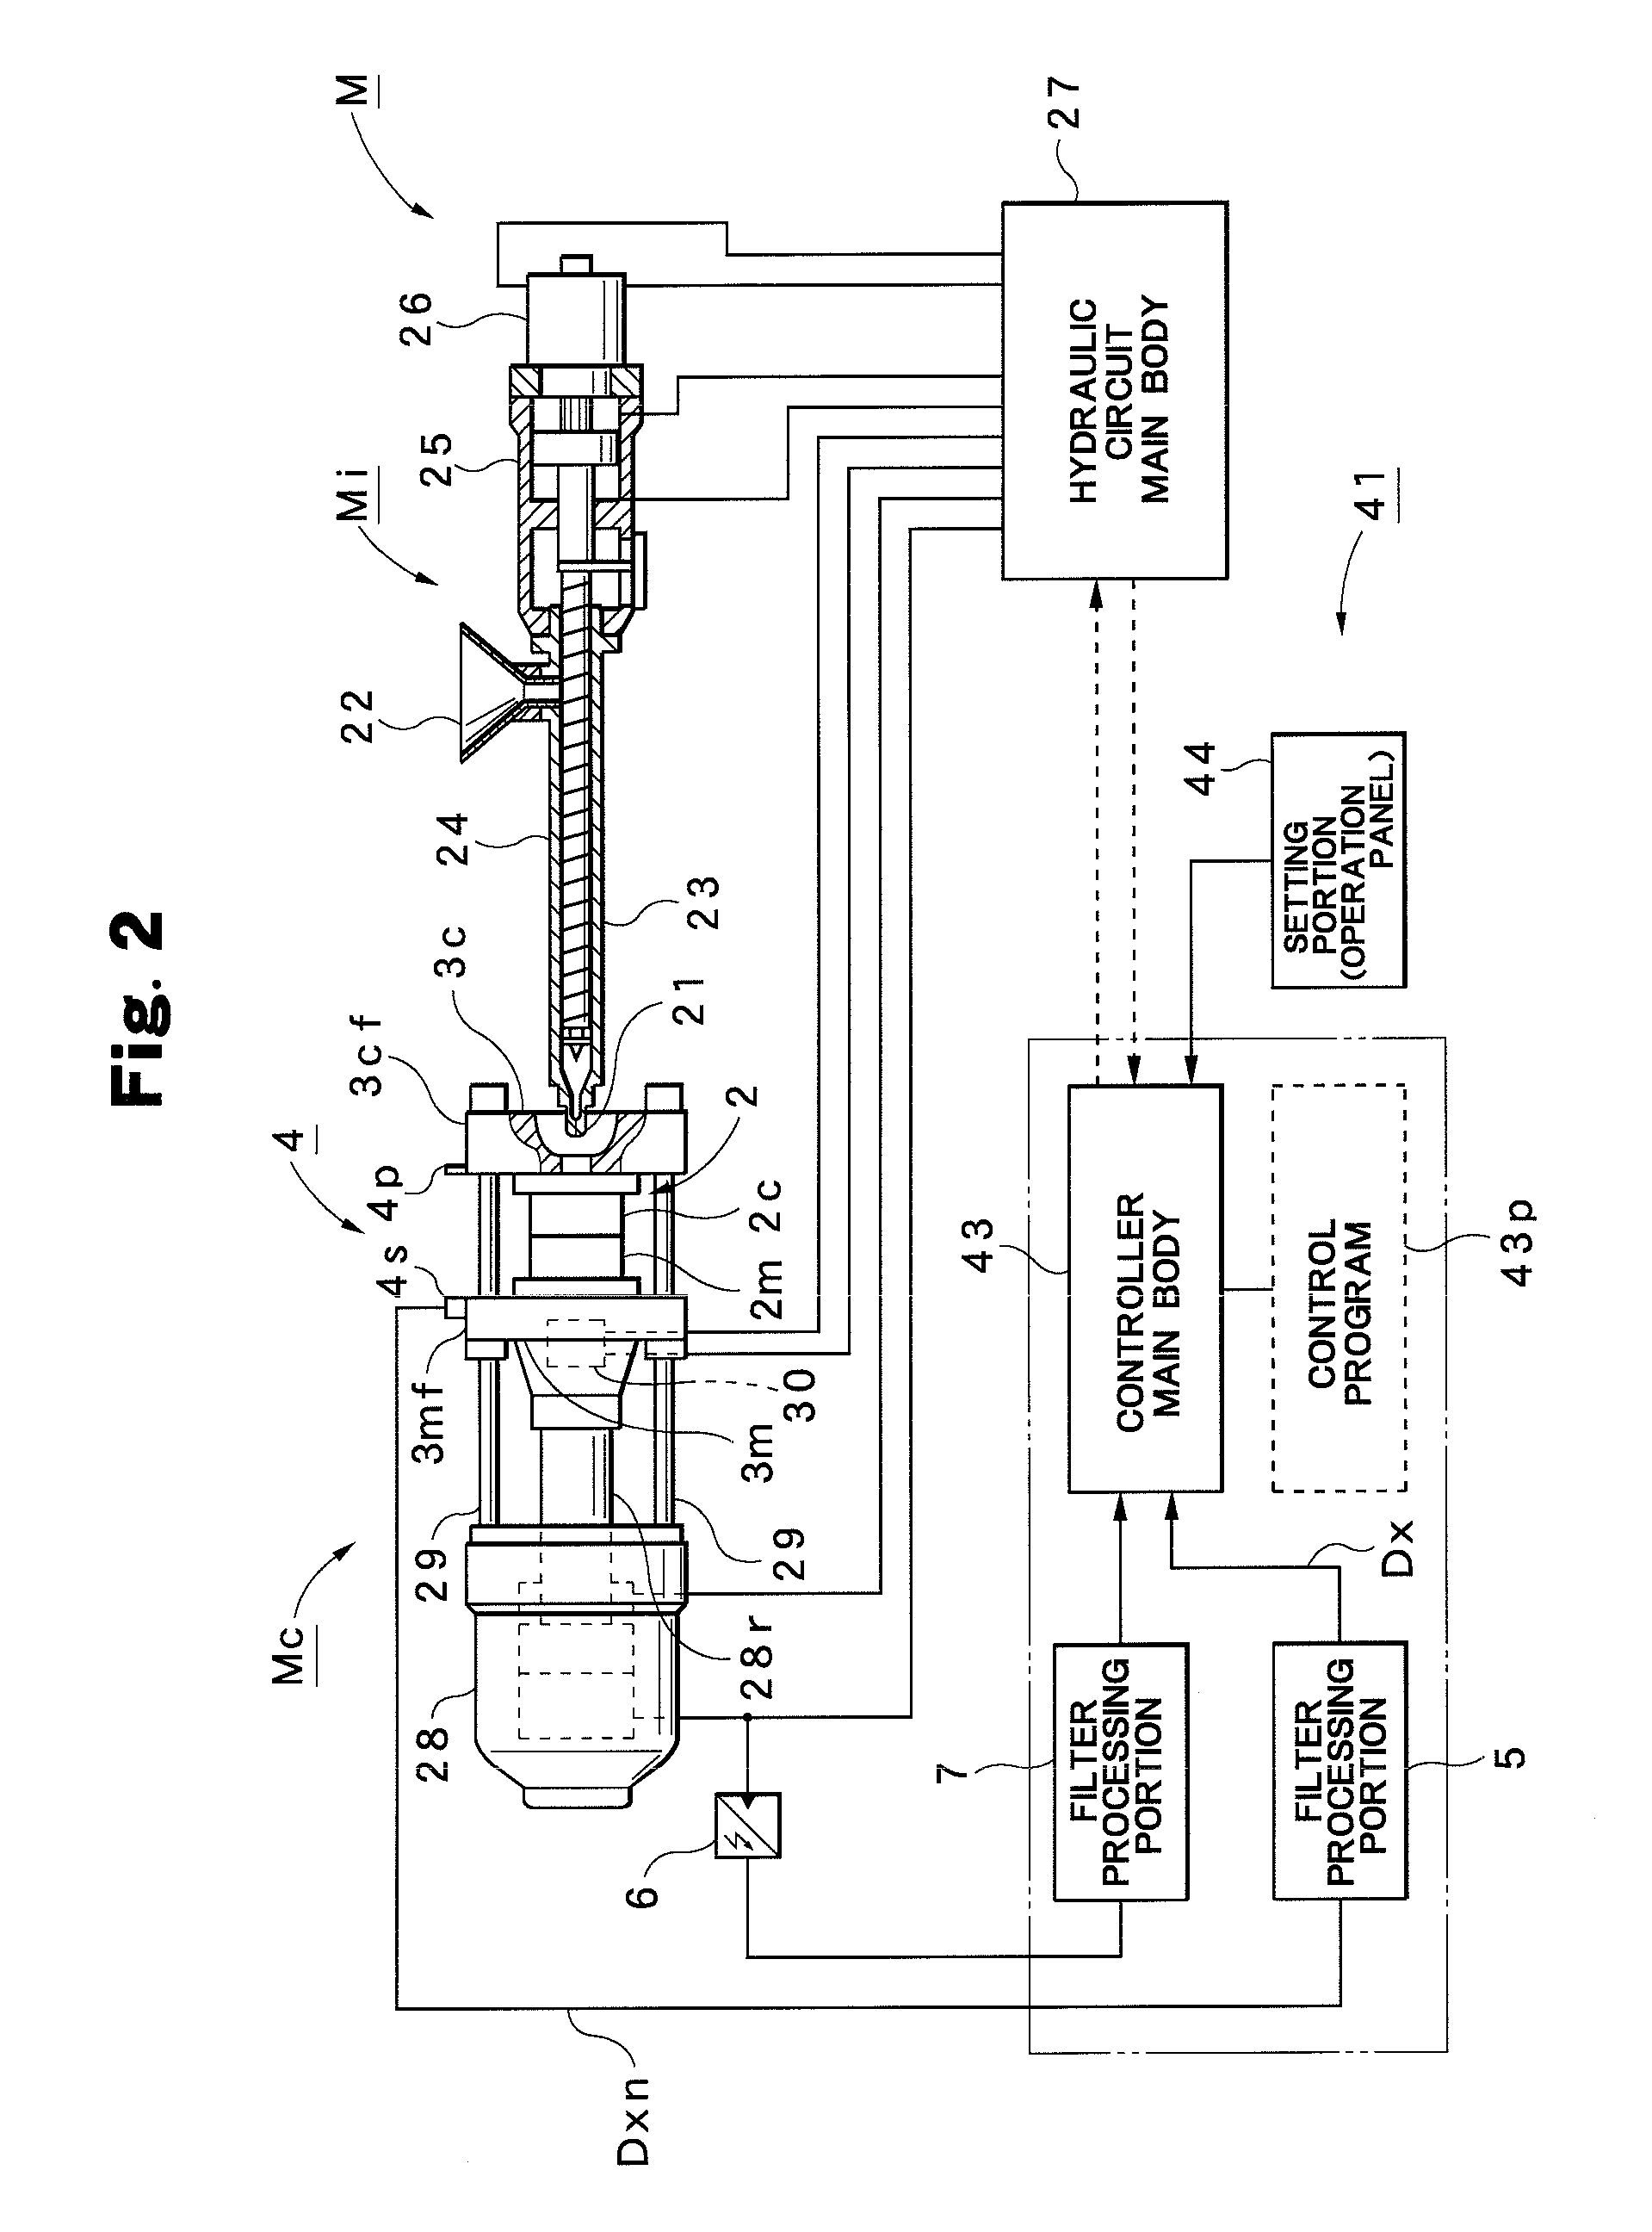 Method of setting mold clamping force of injection molding machine